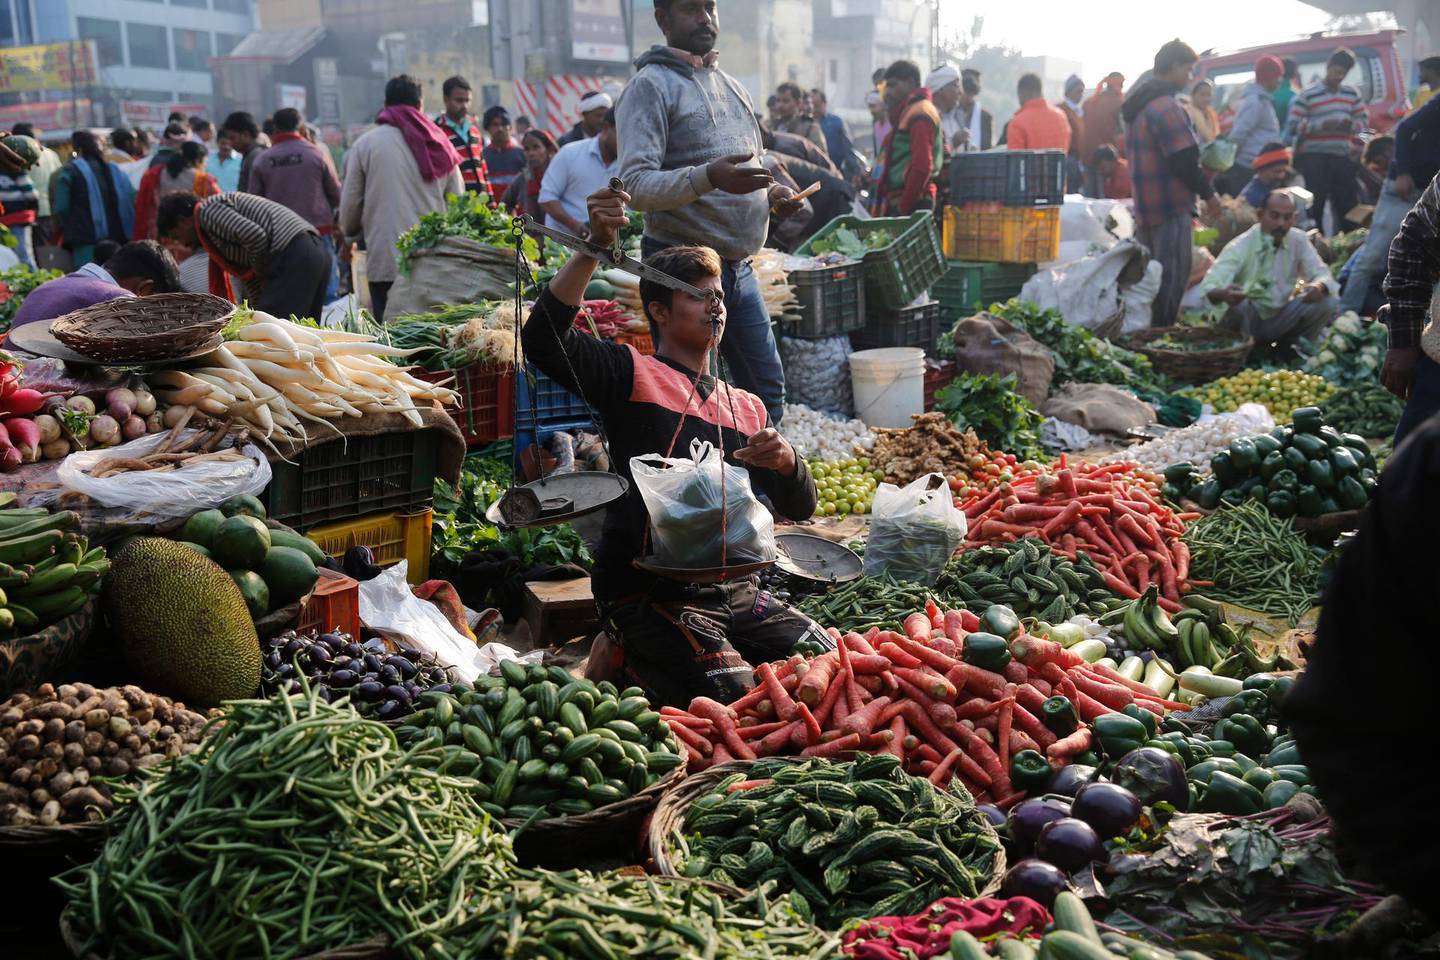 A vegetable vendor weighs vegetables at a market in Lucknow, India, Saturday, Nov. 30, 2019. Indiaâ€™s economic growth slipped to 4.5%, its slowest pace in six years, in the July-September quarter, with the labor-intensive manufacturing sector contracting.(AP Photo/Rajesh Kumar Singh)